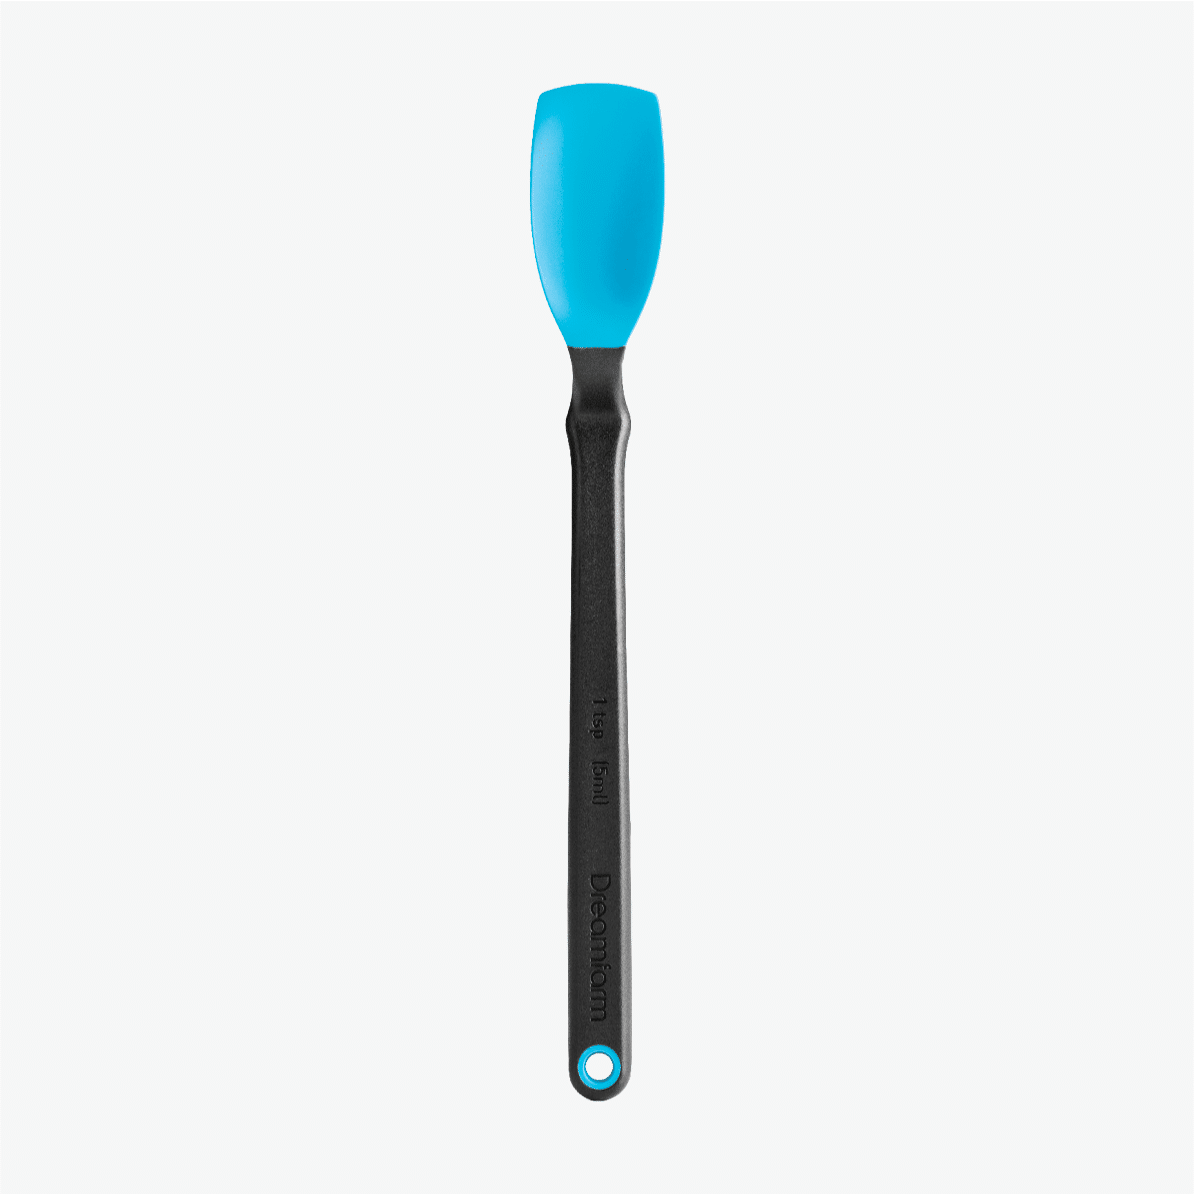 Mini Supoon – the silicone teaspoon that leaves no bit behind. With its unique handle design, keep counters clean as it sits up and off surfaces. The flat silicone scraping tip and flexible sides ensure you scrape every last piece from jars or bowls. Perfect for serving condiments and measuring a precise teaspoon, Mini Supoon is safe for non-stick cookware and heat-resistant up to 260°C / 500°F. 